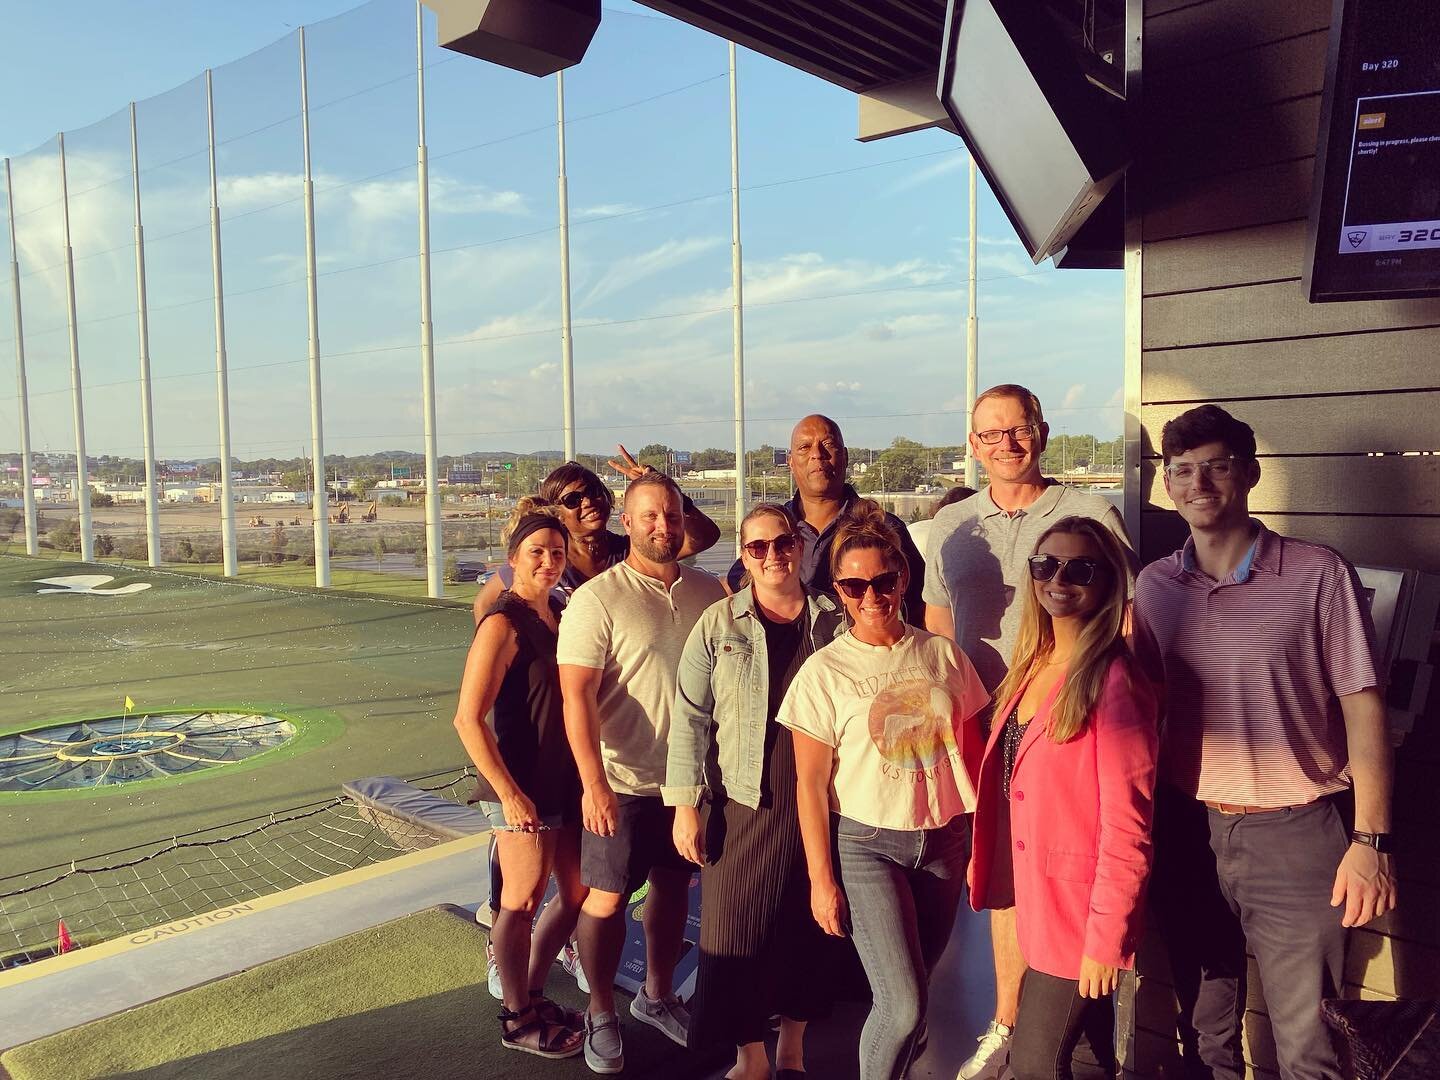 The @one_nashville team enjoyed a fun night at @topgolf! This team is the best! ⛳️ 🤩🎉